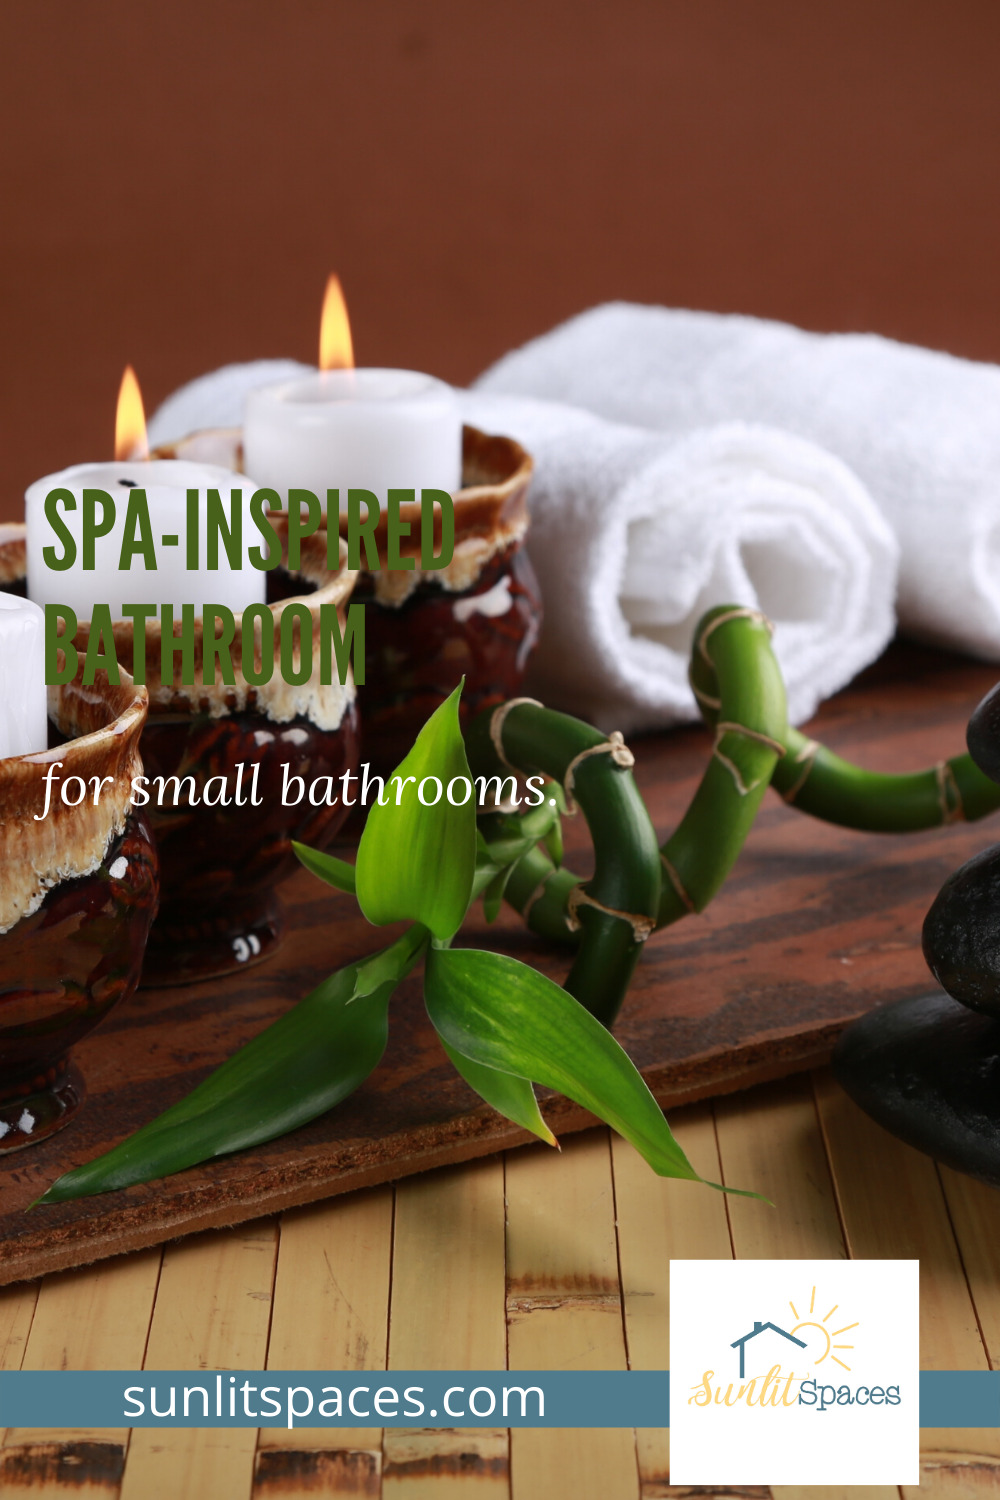 Even if your bathroom is small, you still can create that spa-inspired feel with just a few tricks. Did you know that white is a must for a spa like environment? Read on to learn just how easy you can make your bathroom feel like a spa. #spabathroomideas #bathroomdecor #sunlitspacesblog